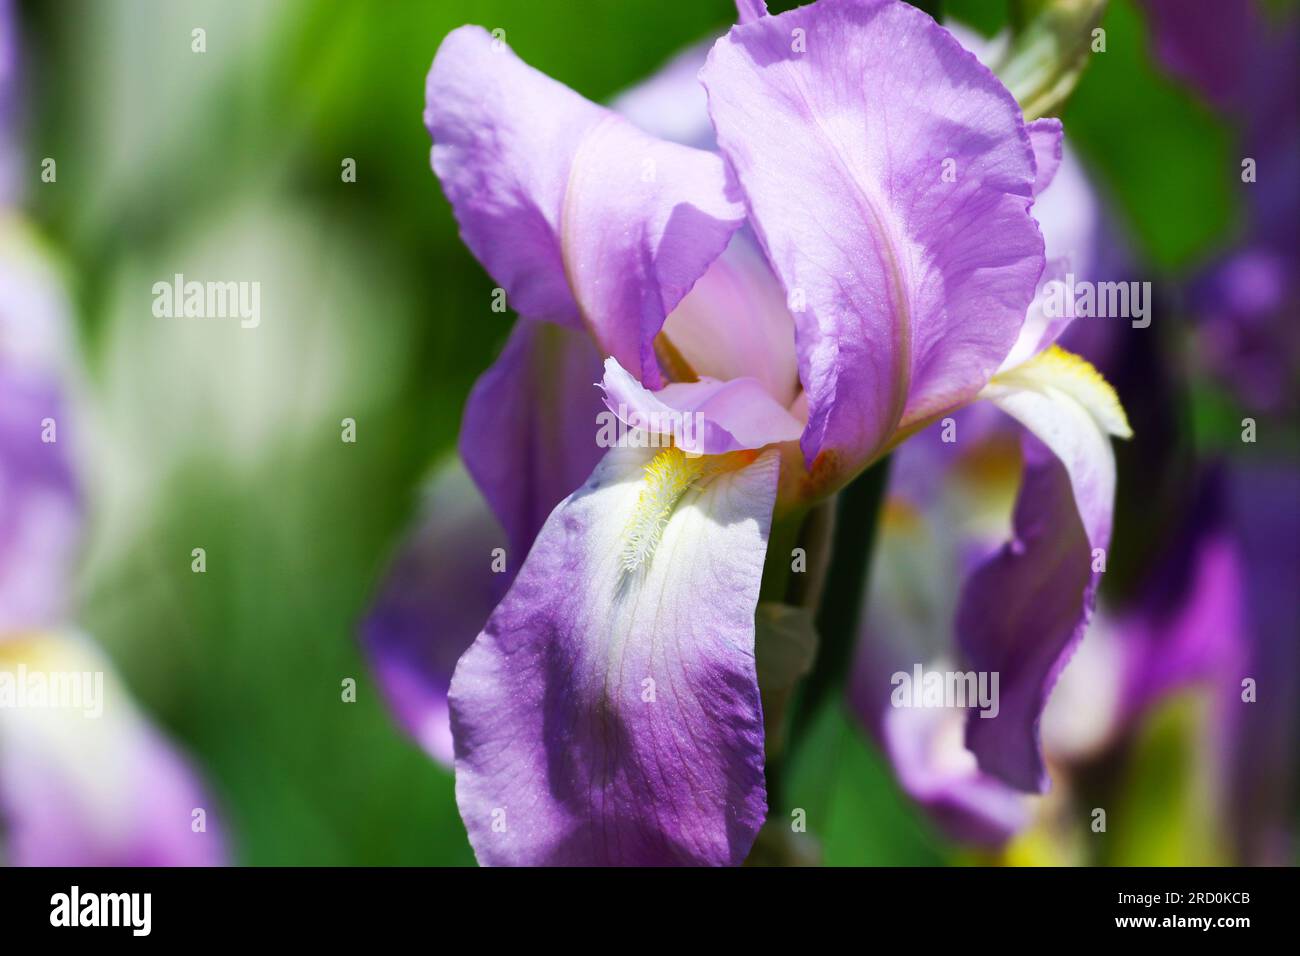 Close up macro shot of purple and white flowering iris plant in a garden. Shallow depth of field Stock Photo